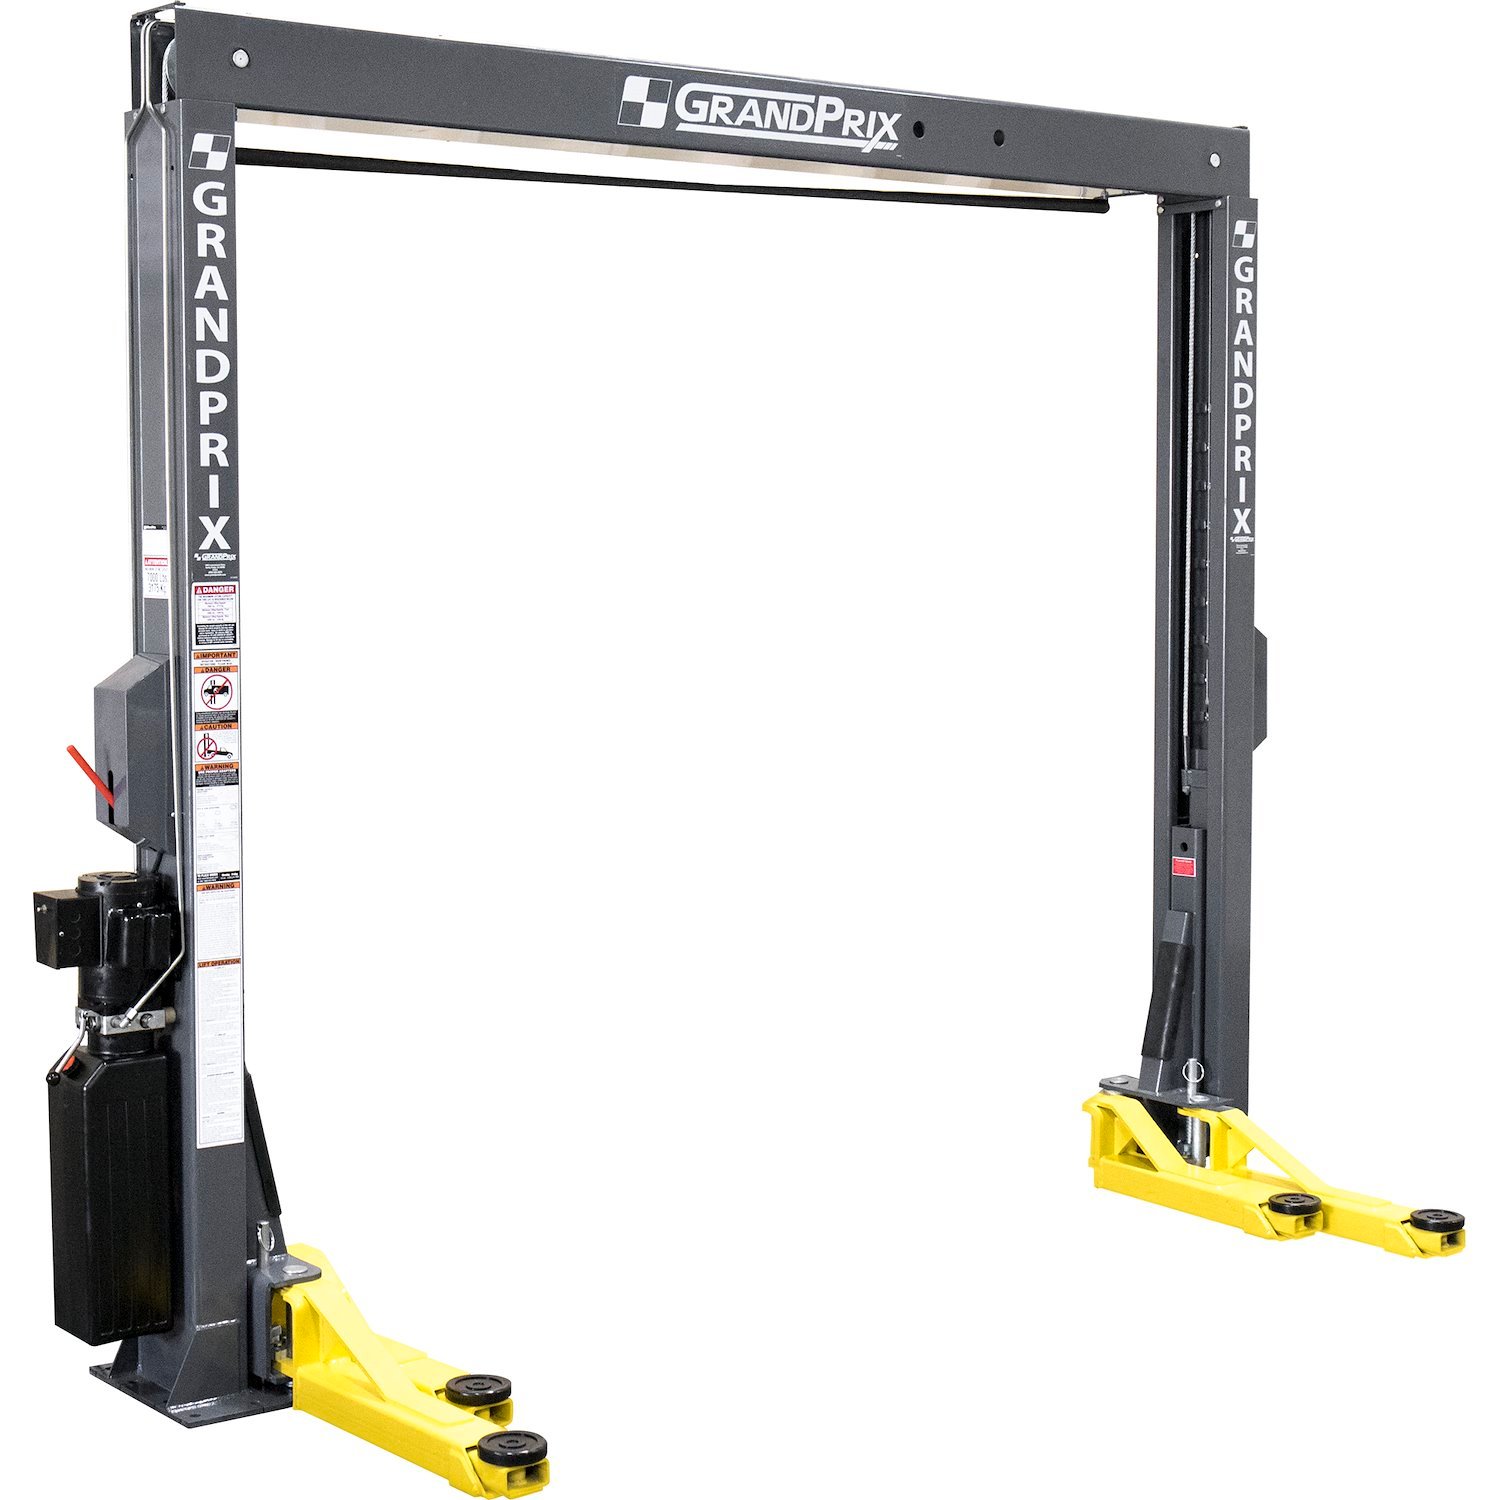 GrandPrix Two-Post Vehicle Lift, 7,000 lbs. Capacity, 78 in. Max Rise